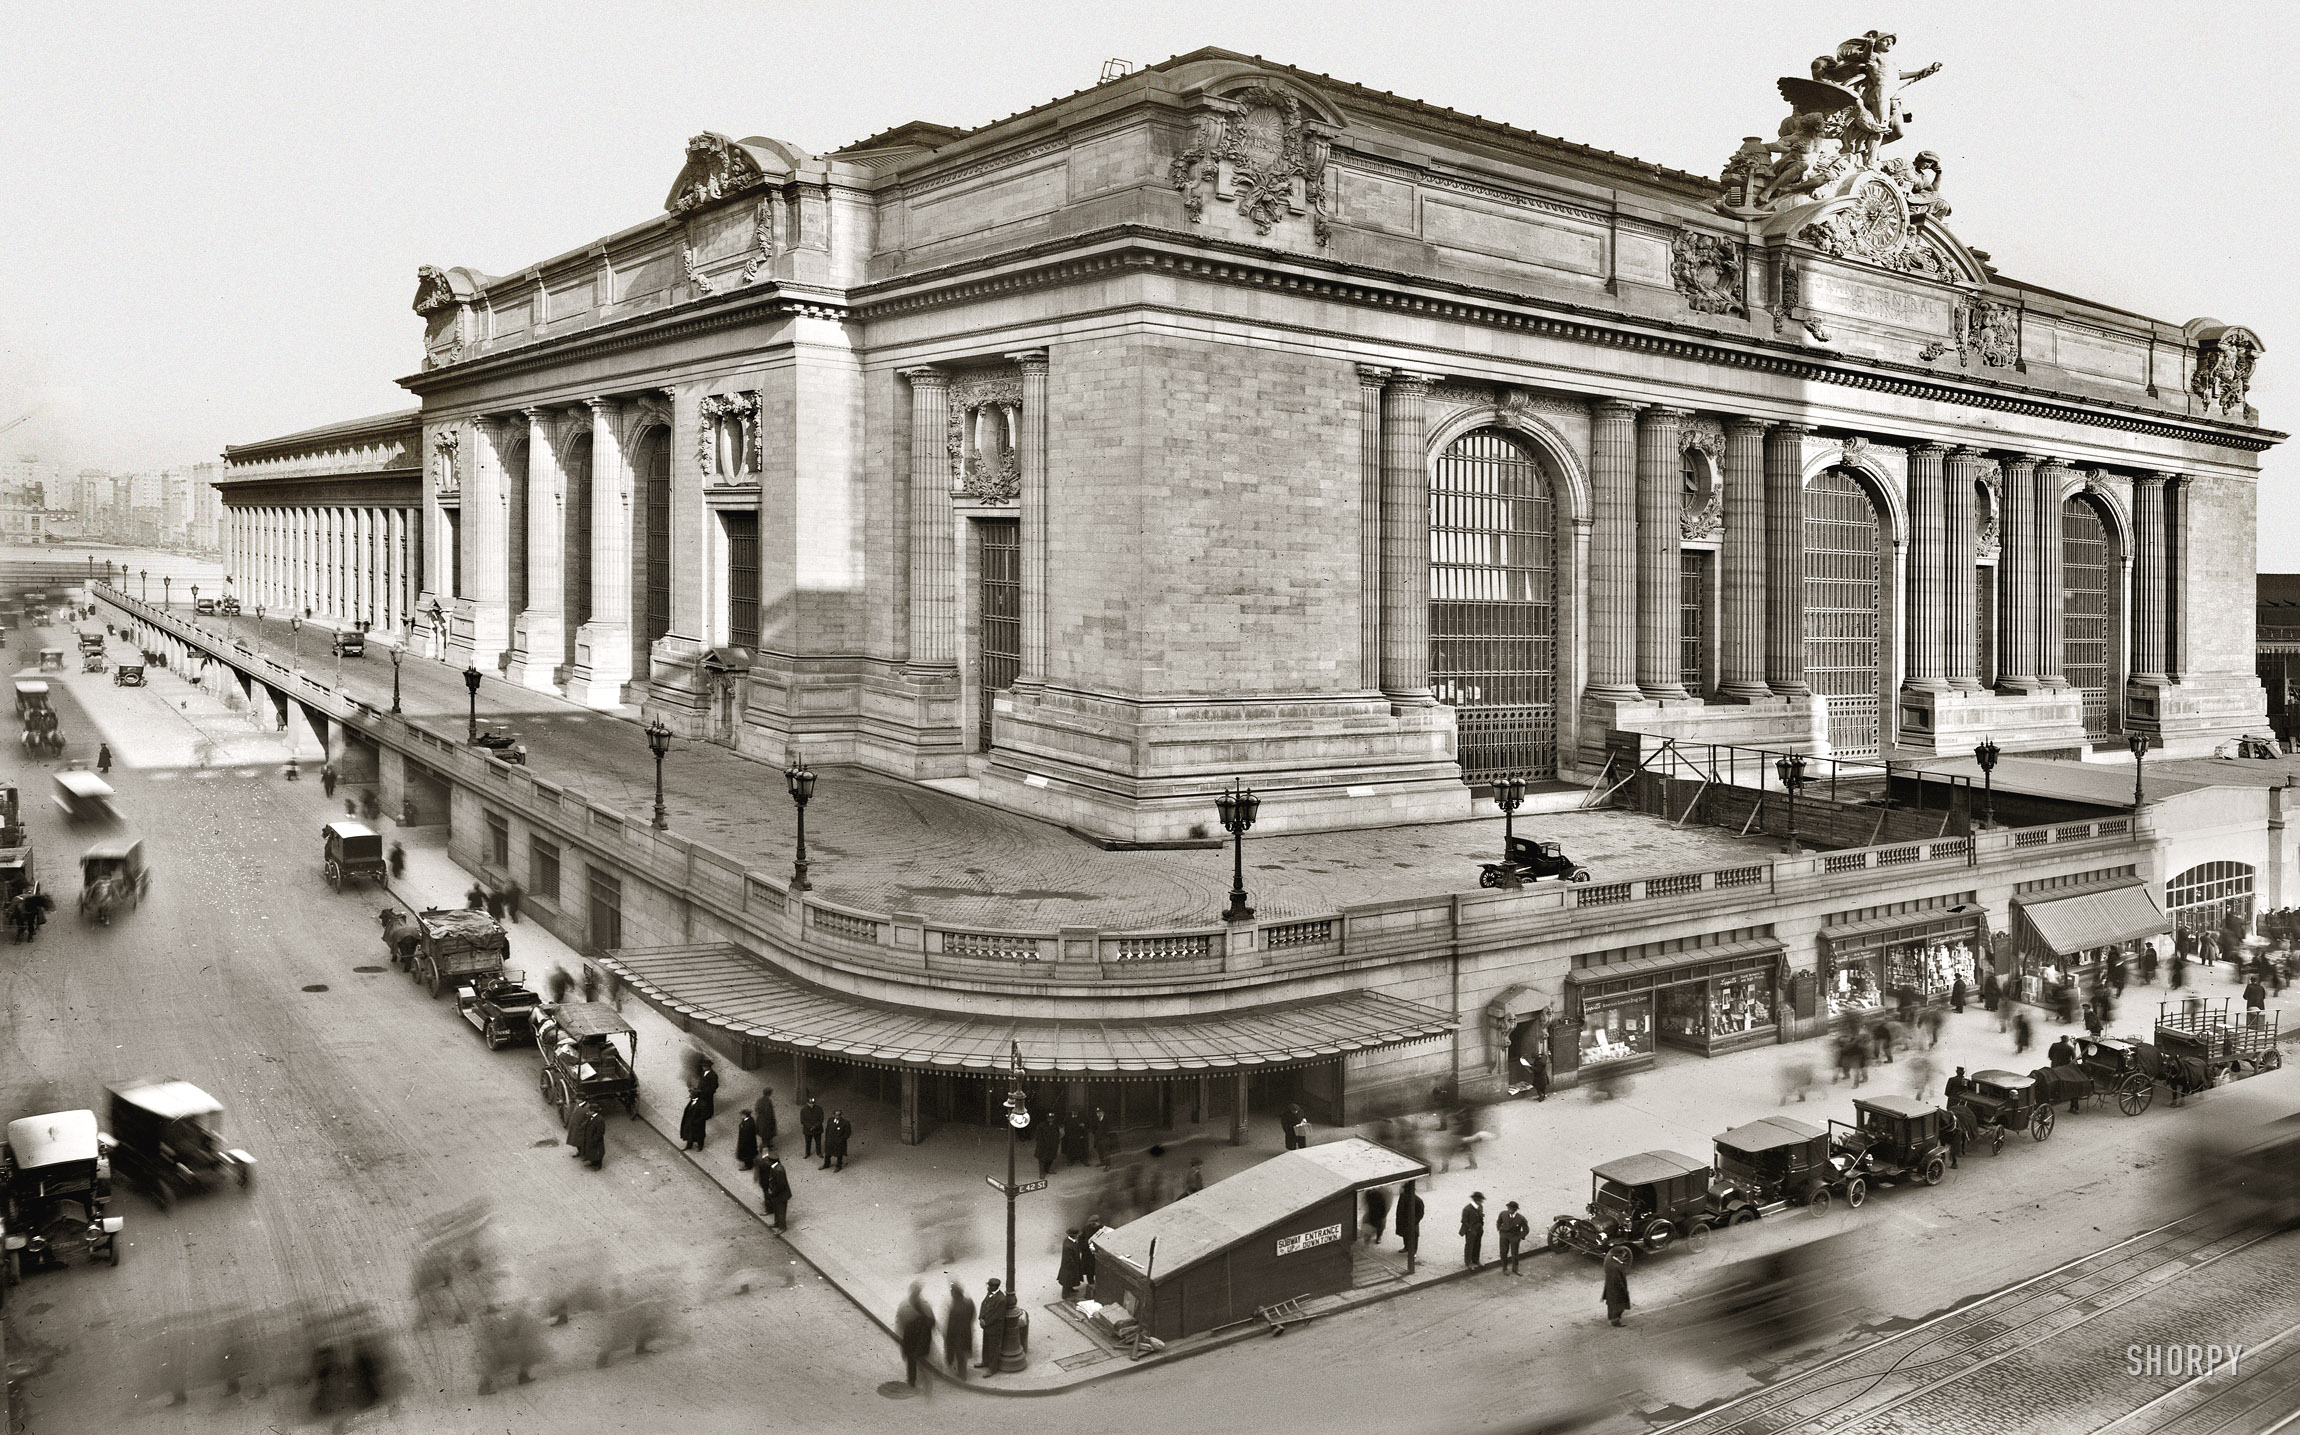 New York's Grand Central Station nearing completion sometime around 1913. 8x10 glass negative, George Grantham Bain Collection. View full size.